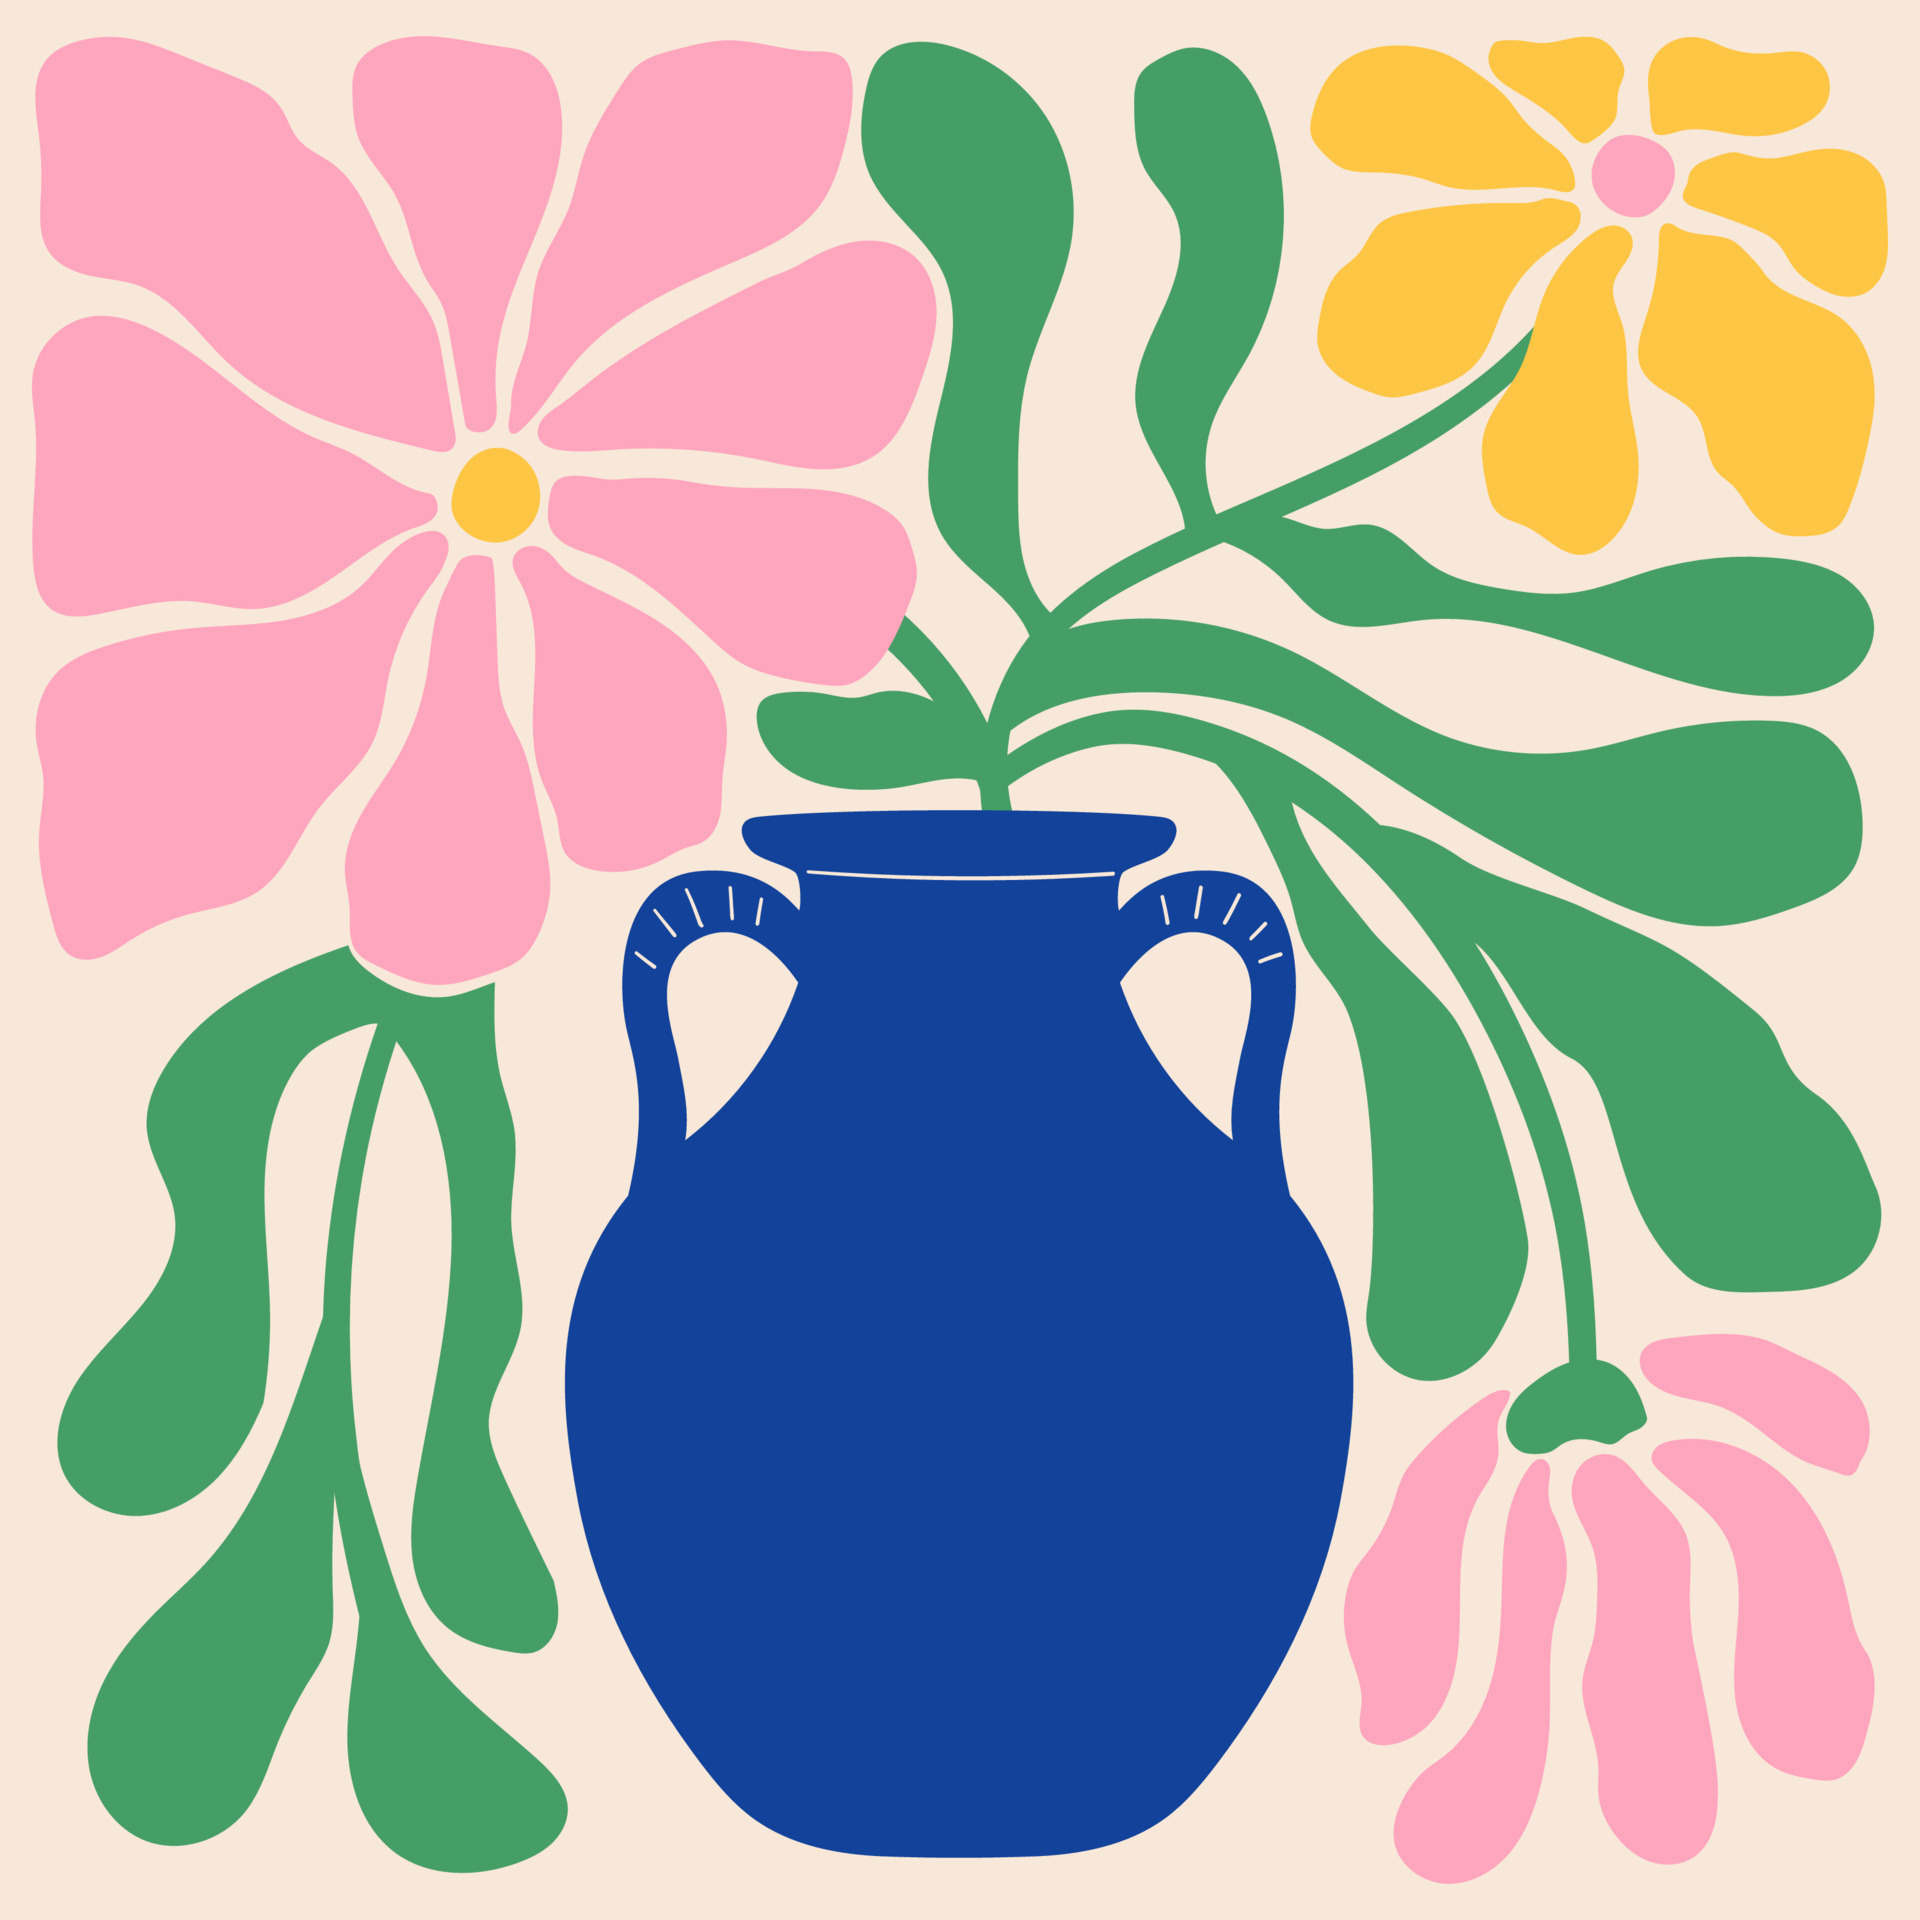 https://static.vecteezy.com/system/resources/previews/021/839/777/original/groovy-doodle-and-abstract-organic-plant-shapes-art-matisse-floral-poster-in-trendy-retro-60s-70s-style-vector.jpg